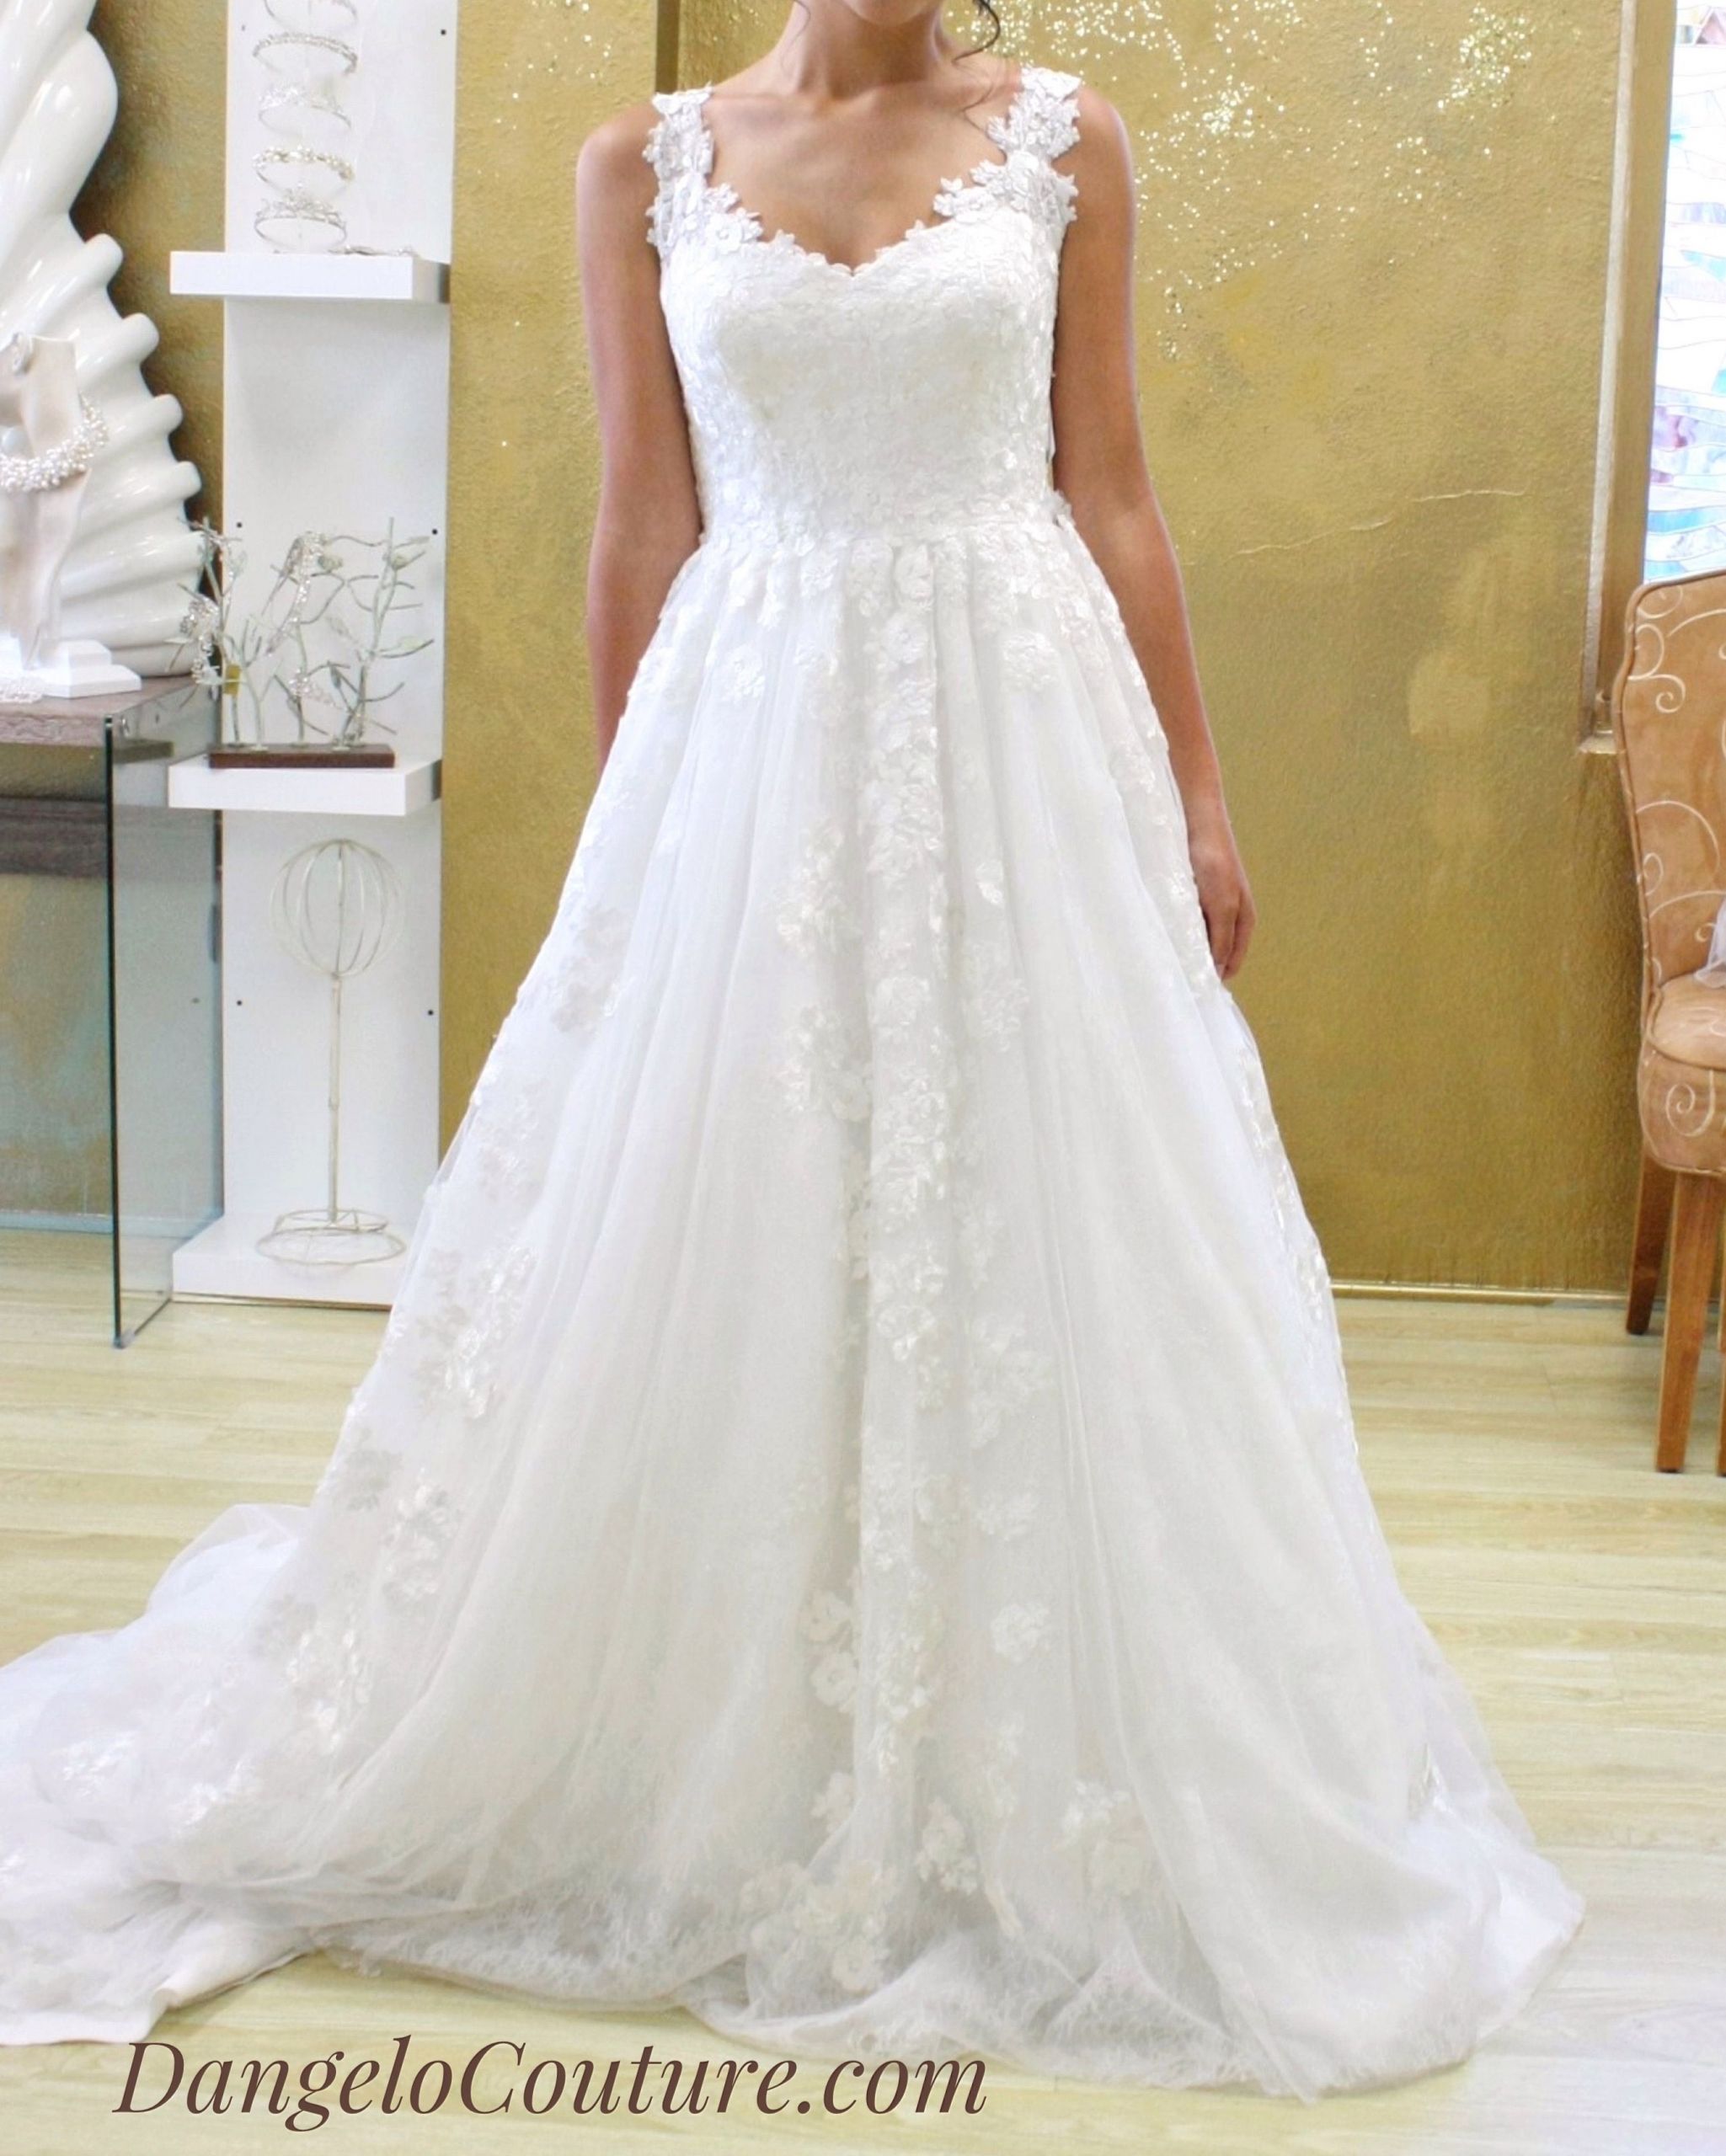 Wedding Gowns San Diego
 Wedding Dresses at D Angelo Couture Bridal in San Diego